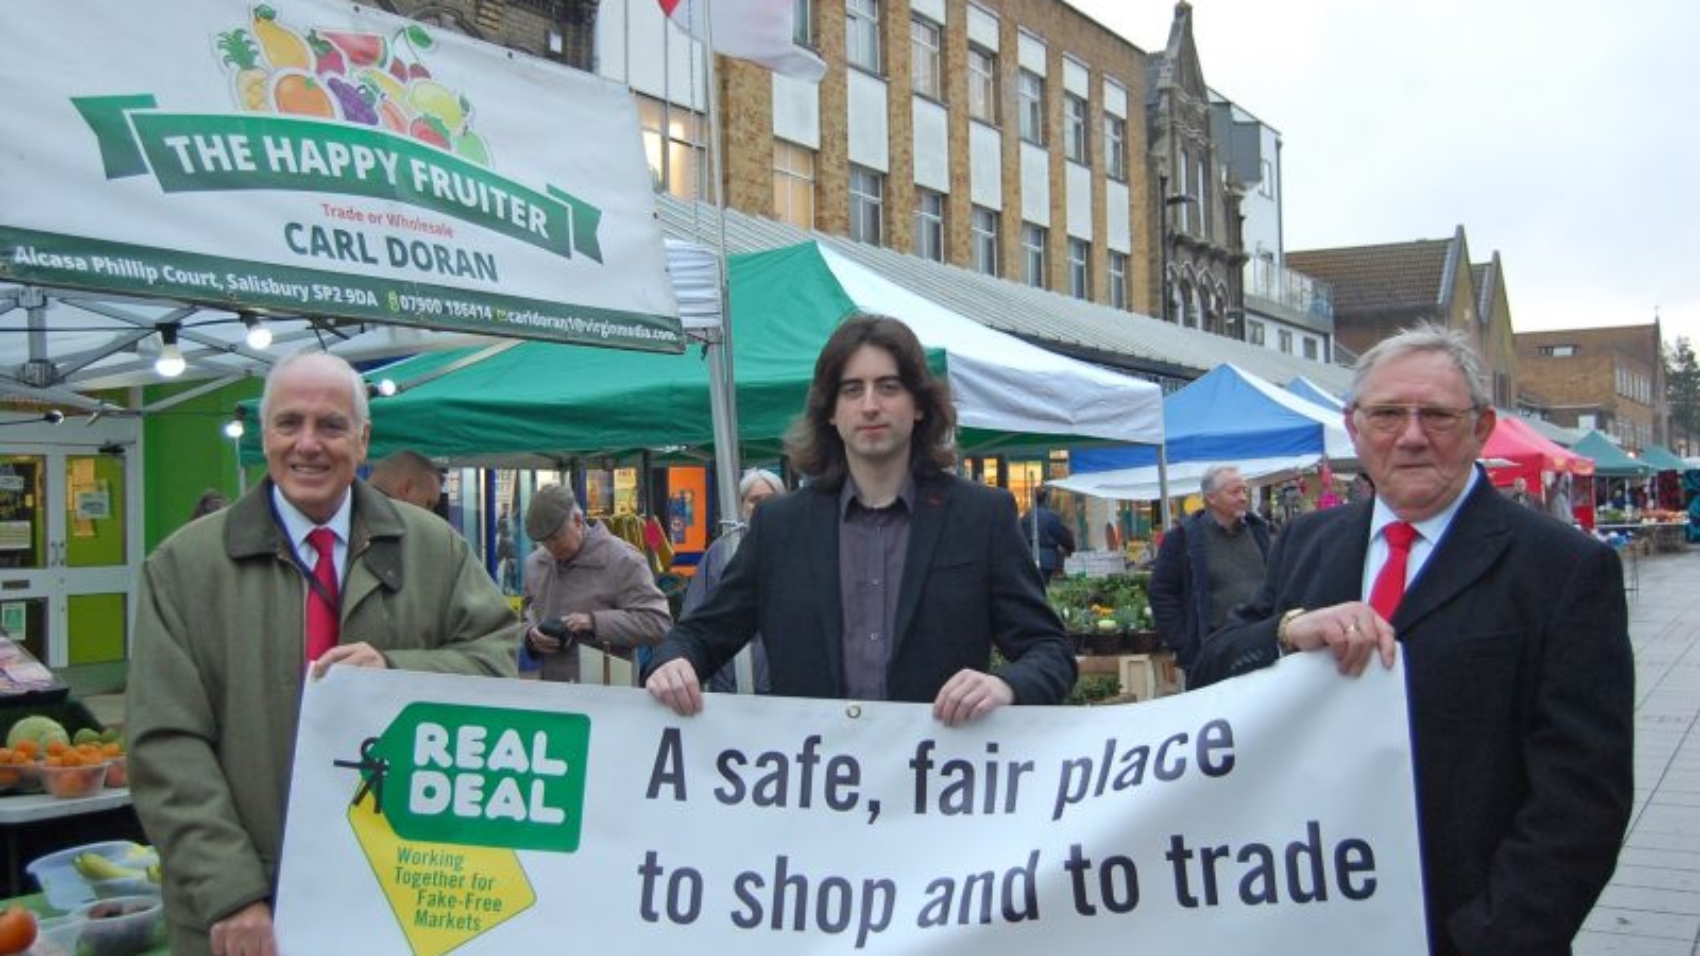 NABMA member Eastleigh Borough Council originally signed the Real Deal Charter in December 2016. The council is now re-promoting the Real Deal message to help publicise a new car boot fair which has recently been launched by Eastleigh Market.